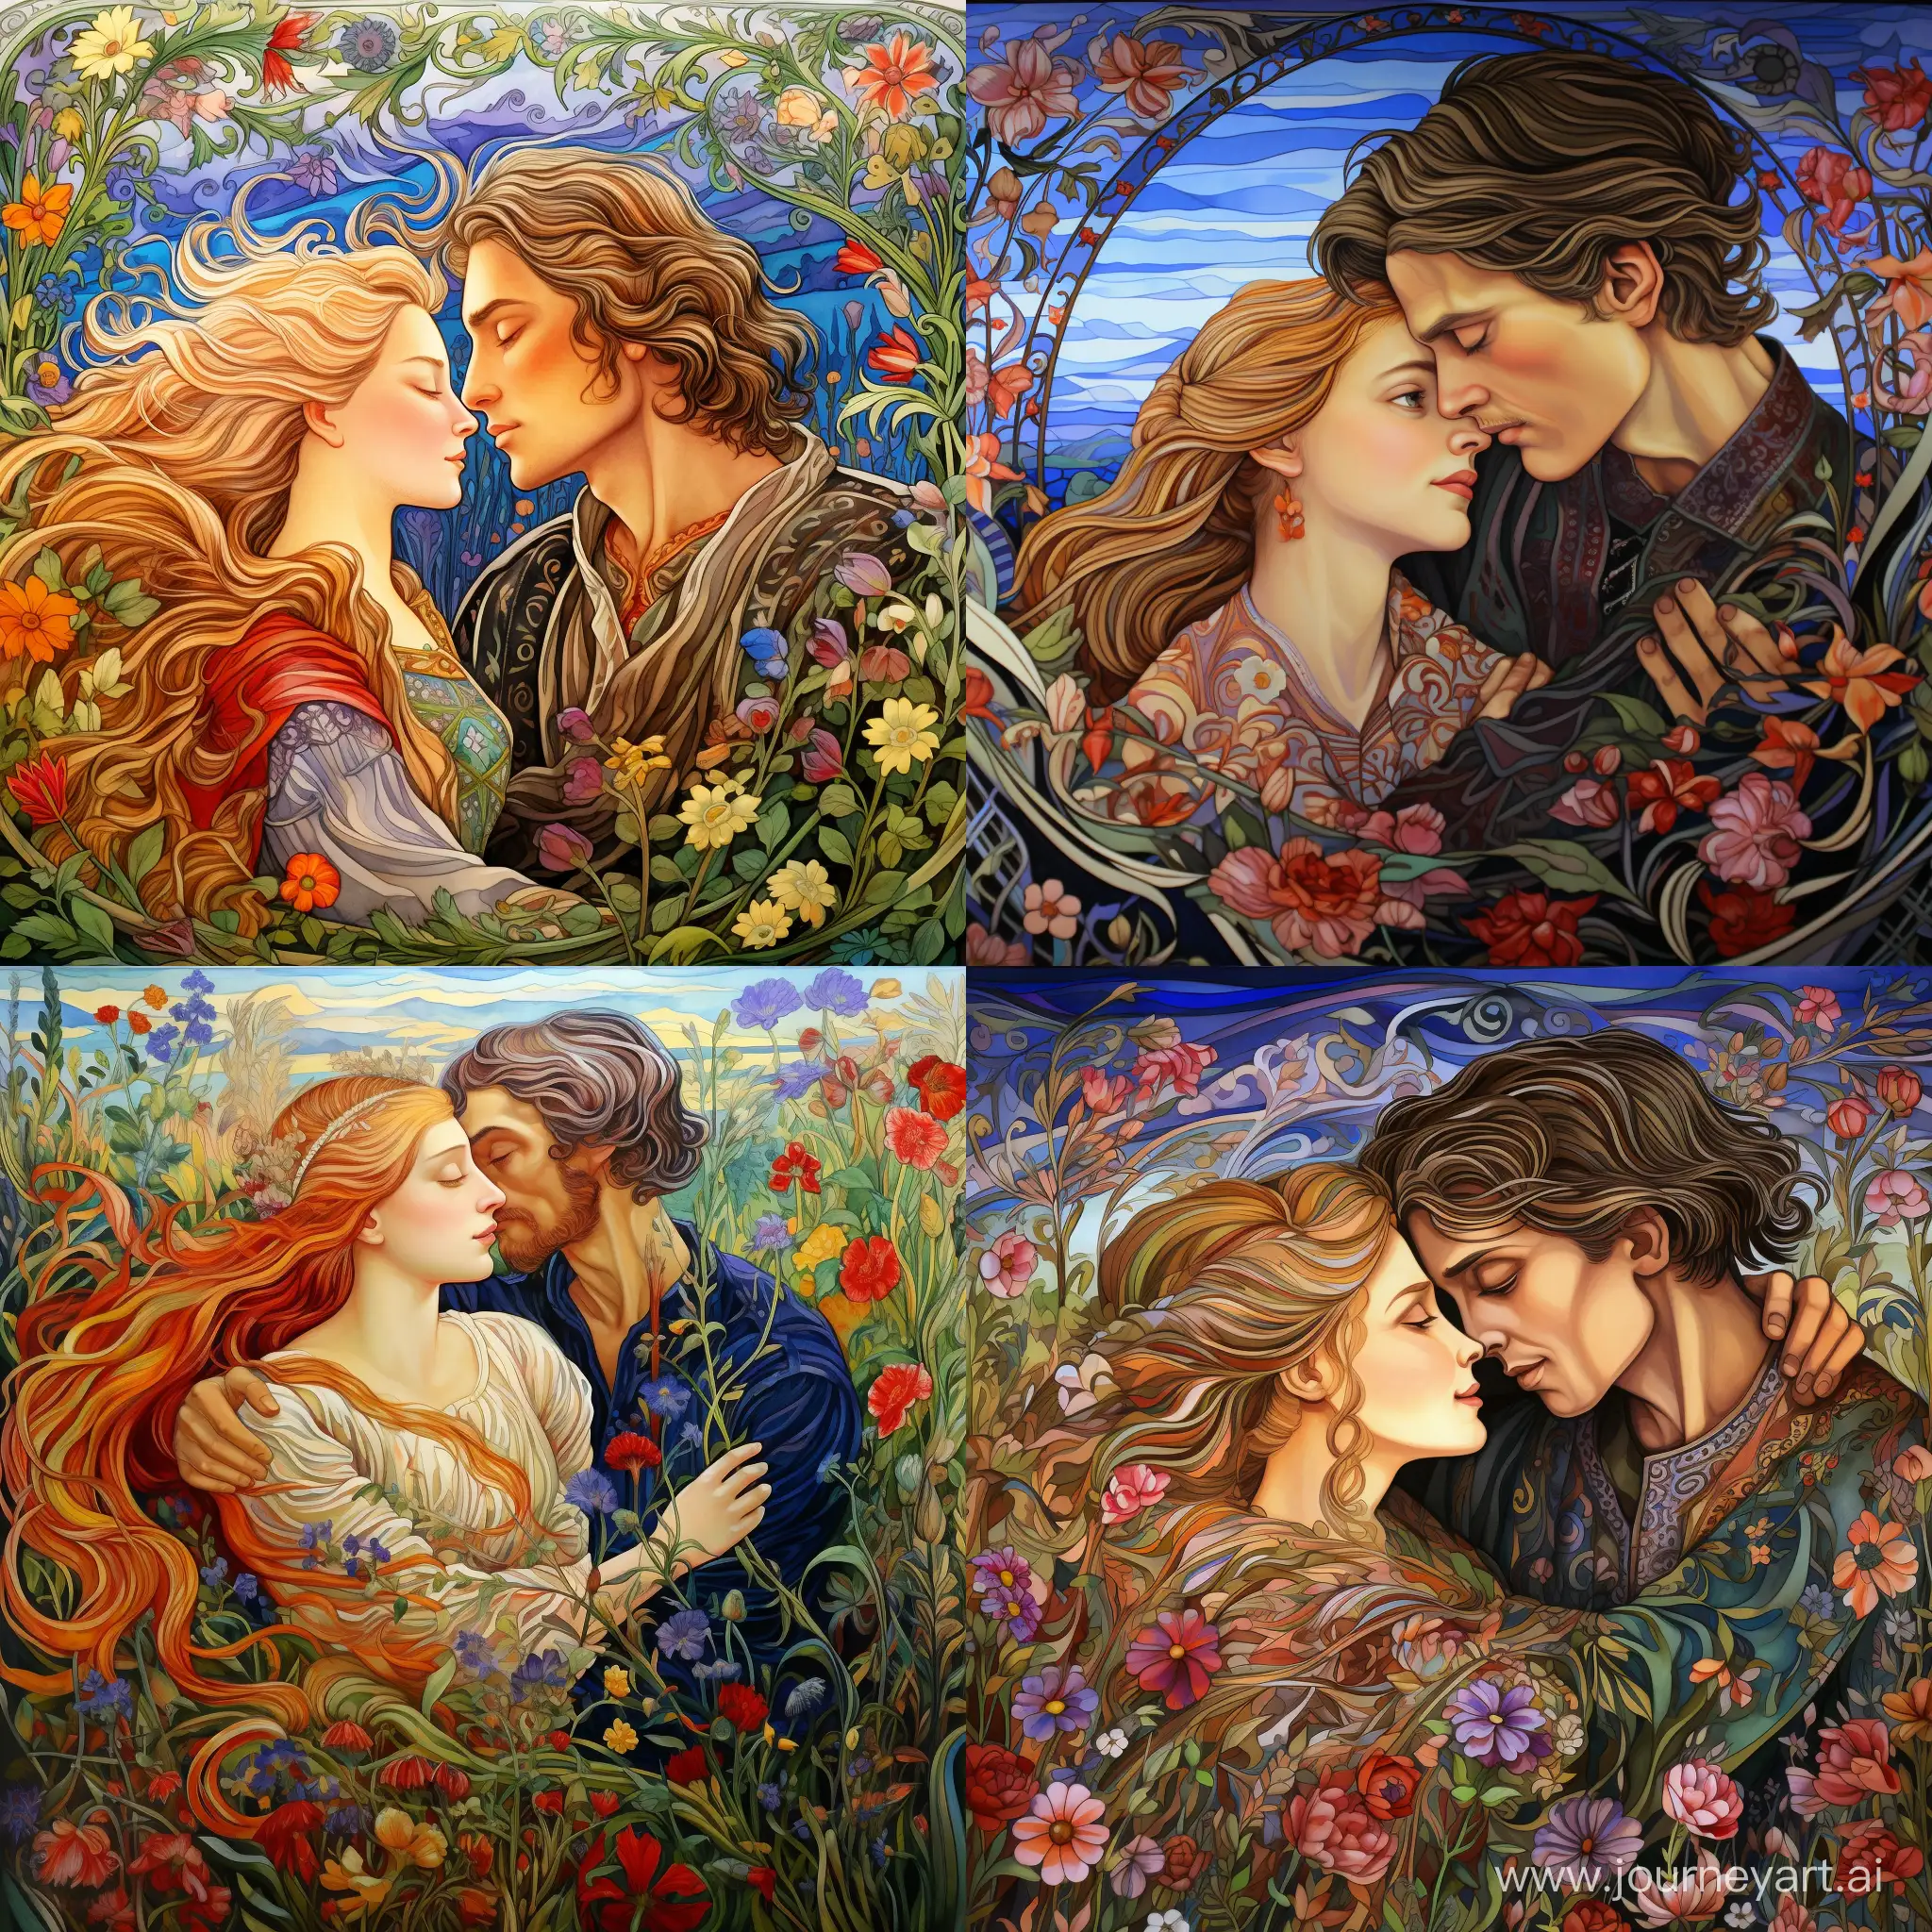 Russian Russian Russian Russian folklore, a couple of lovers imagines the embodiment of loving tenderness in the arms of a man and a woman, the wind blows their hair in a floral whirlwind against the background of a Russian field, detailed drawing, growth, illumination, clear contour, in the style of ancient paintings, Russian painting, colorful brushstrokes